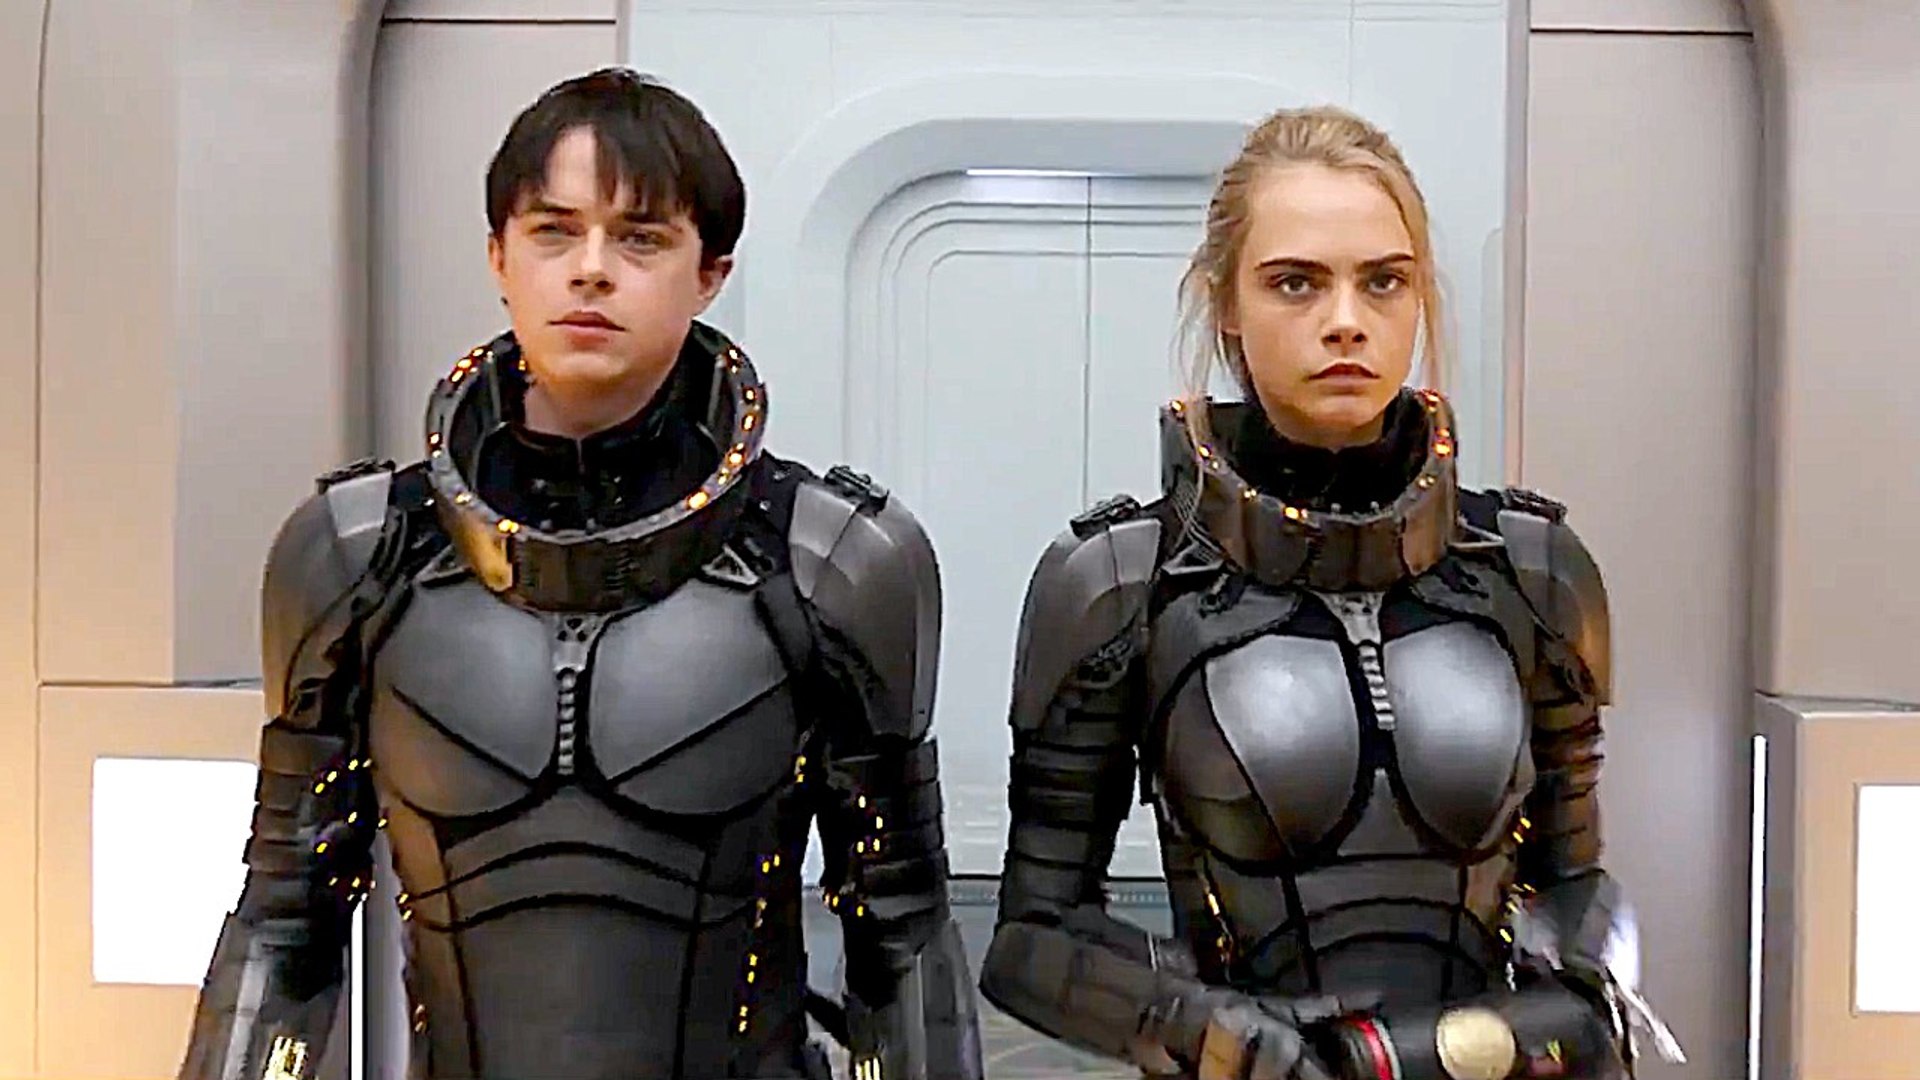 Valerian And Laureline In Valerian And The City Of A Thousand Planets Wallpapers